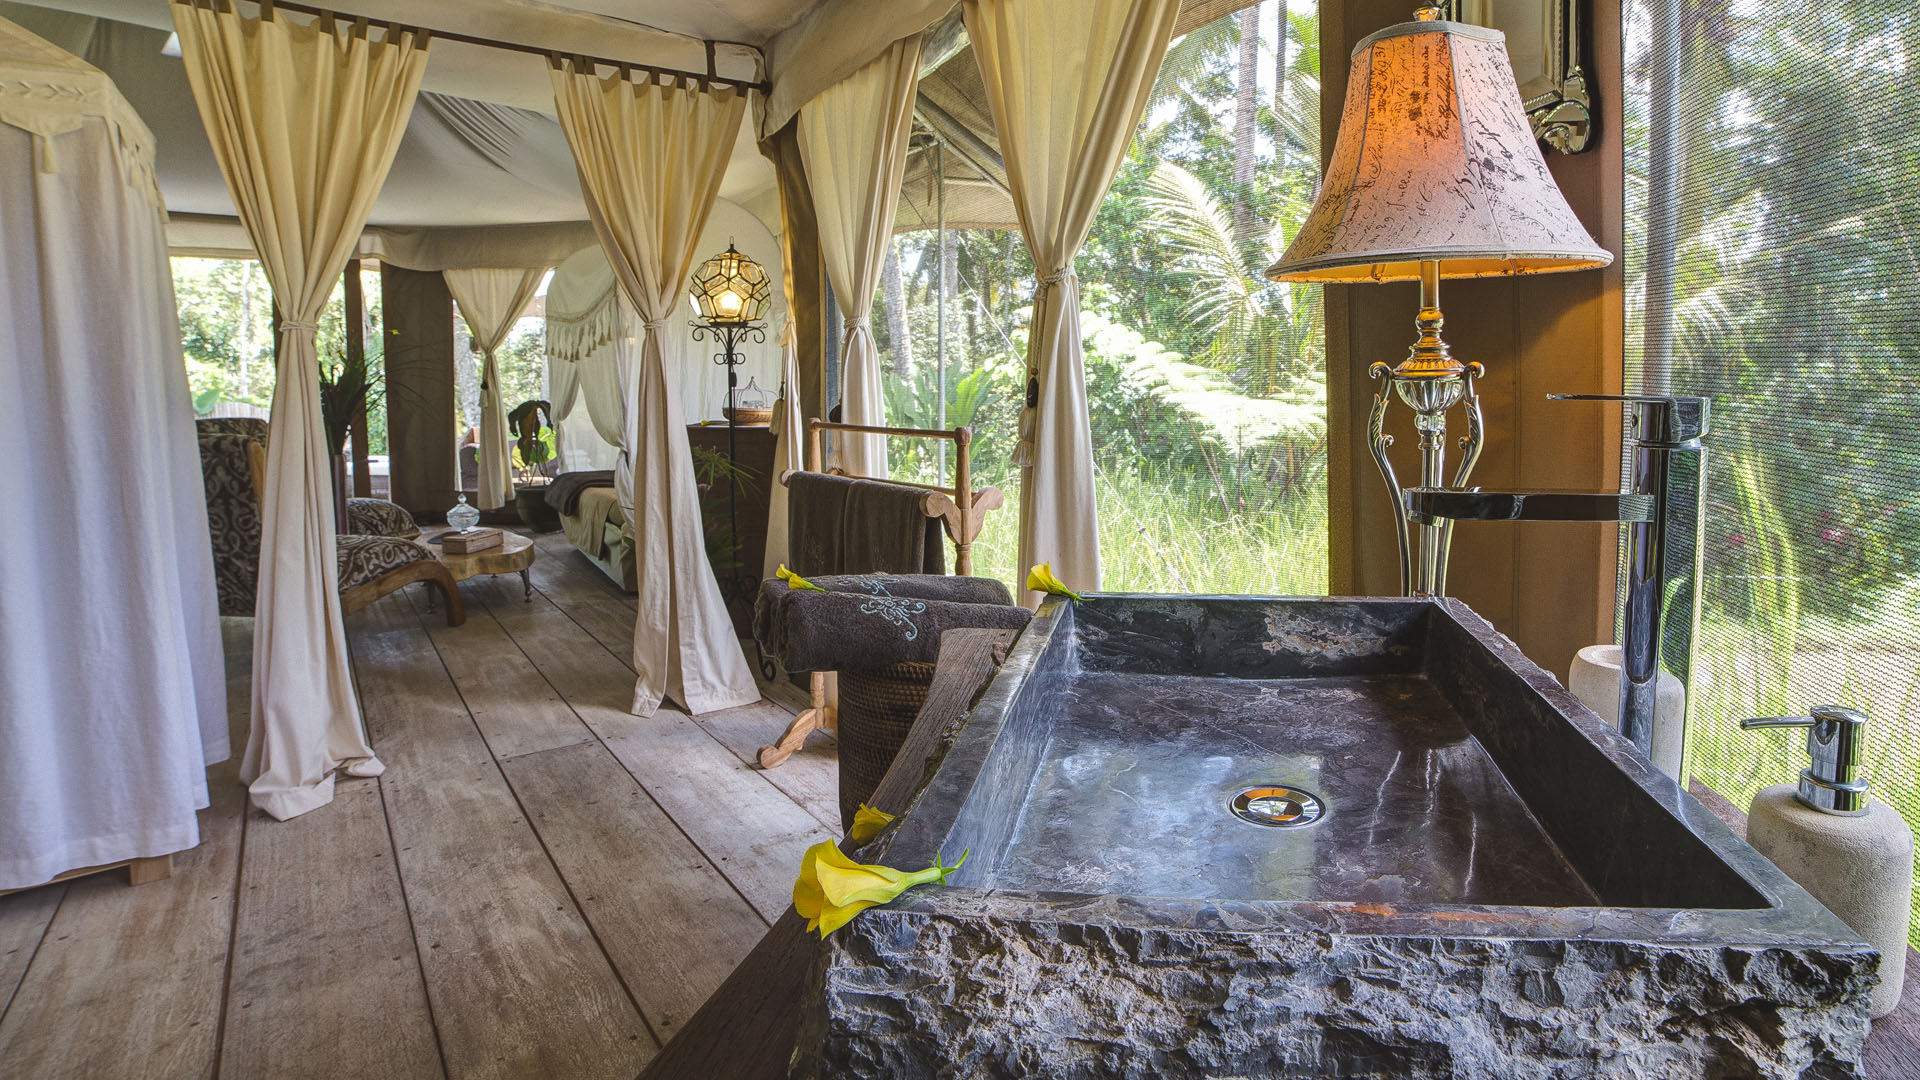 Glamping in Asia - Get in Touch with Nature without Roughing It